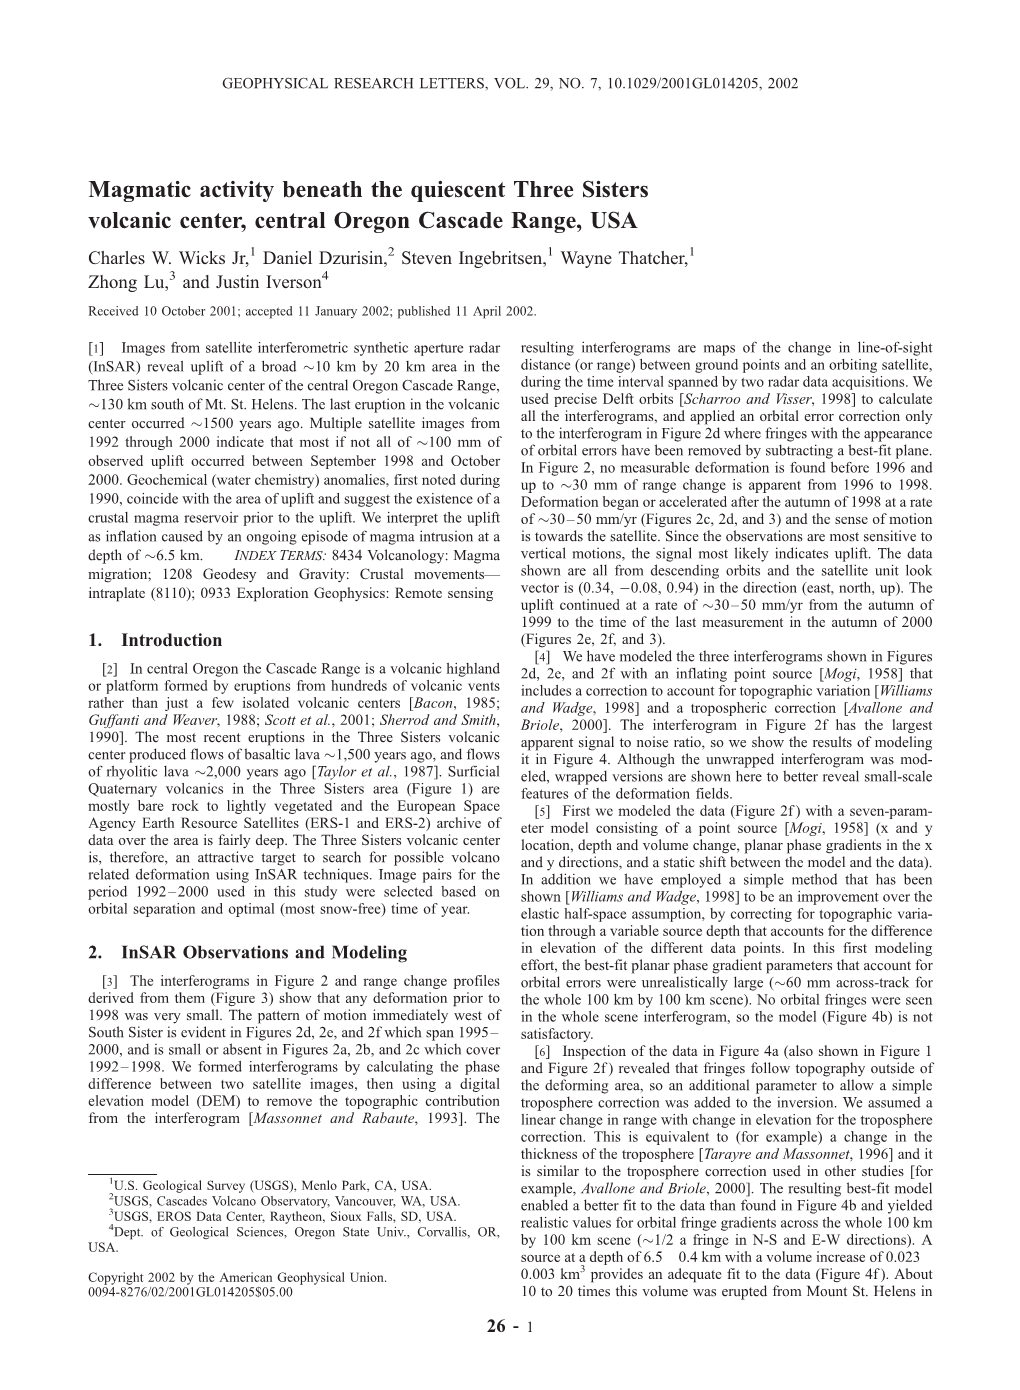 Magmatic Activity Beneath the Quiescent Three Sisters Volcanic Center, Central Oregon Cascade Range, USA Charles W